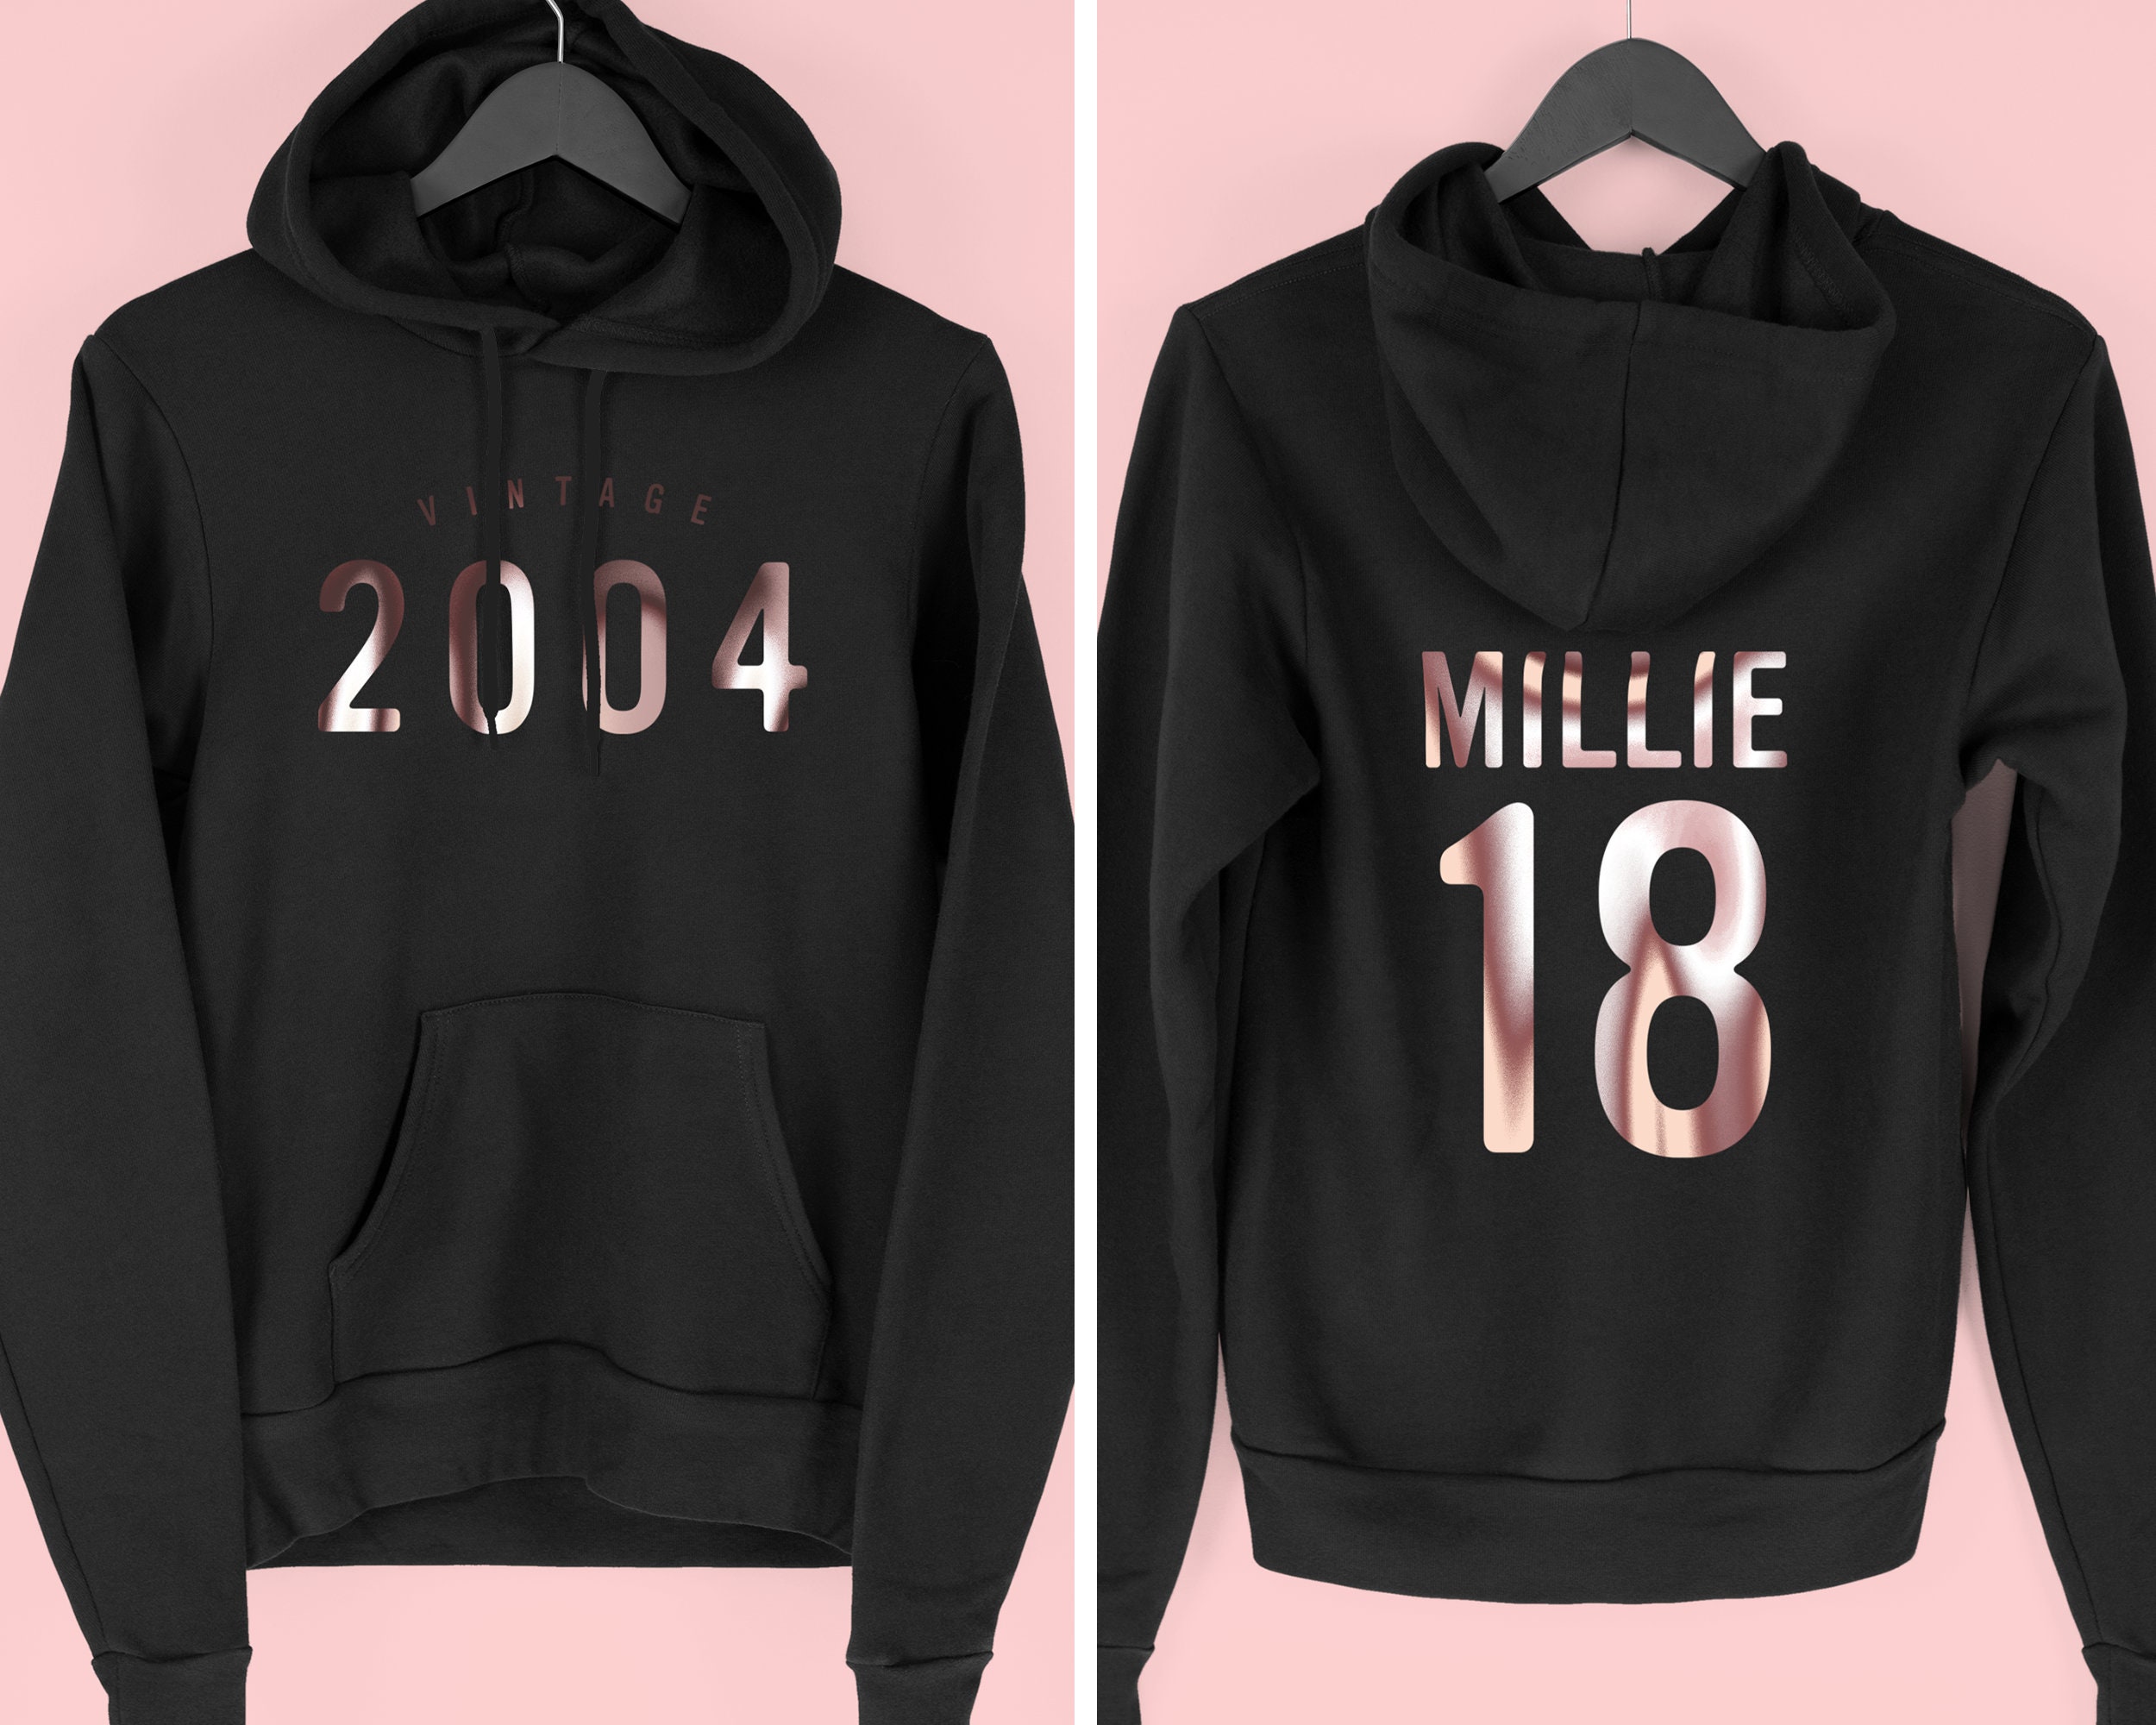 18th Birthday Gift for Girls 2004 Hoody for Her By Mr Porkys™ Limited Edition 2004 Hoodie 18th Birthday Hoodie Women Clothing Womens Clothing Hoodies & Sweatshirts Hoodies 